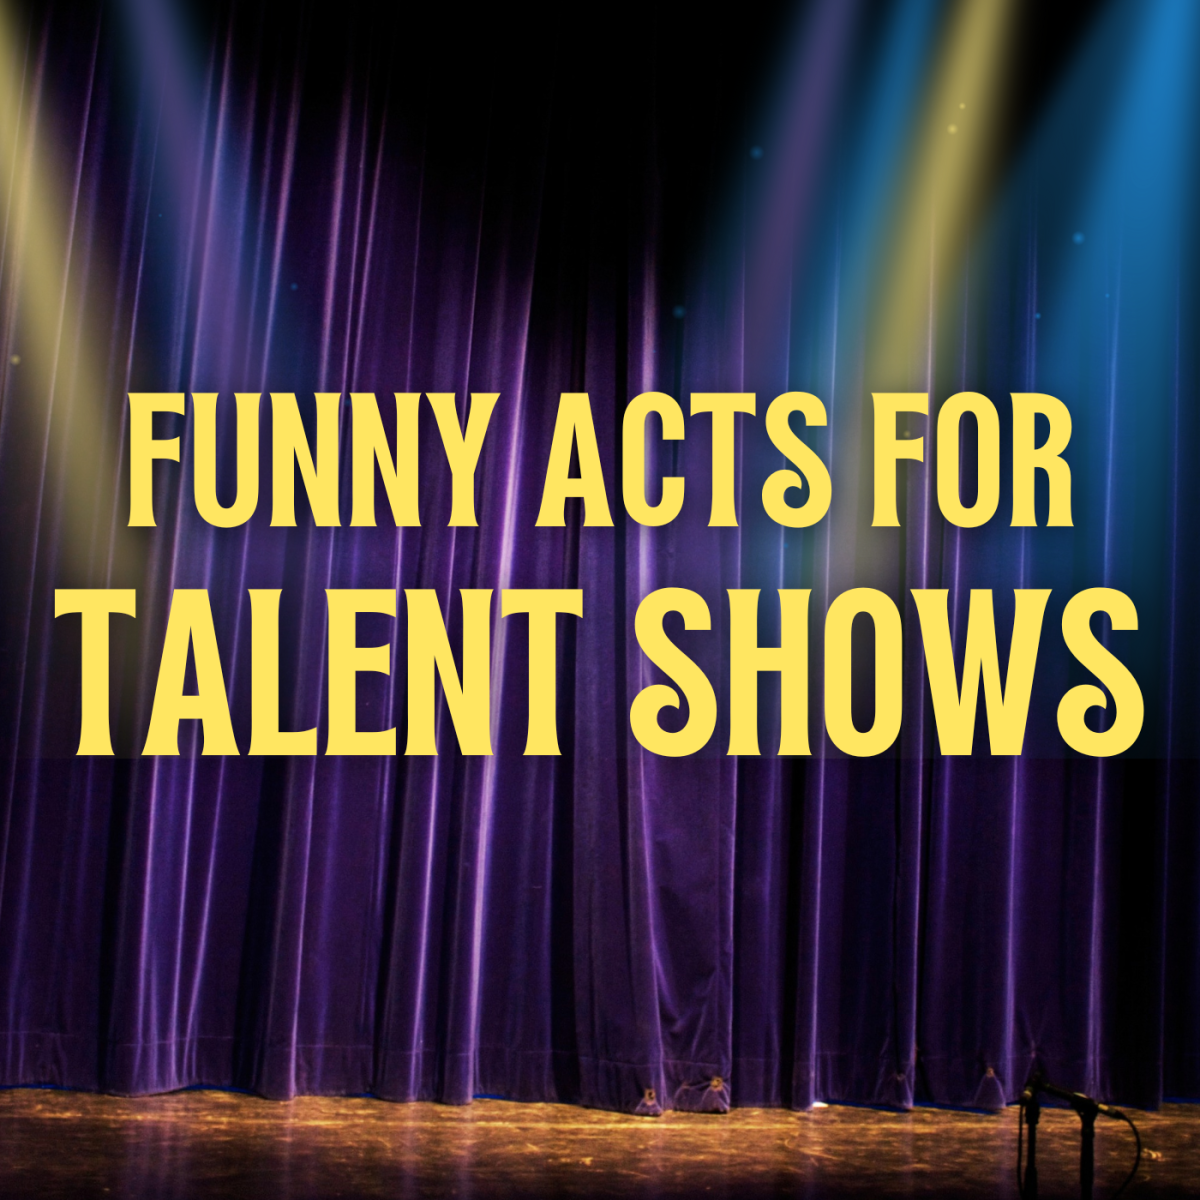 Funny Talent Show Ideas for Kids or Adults